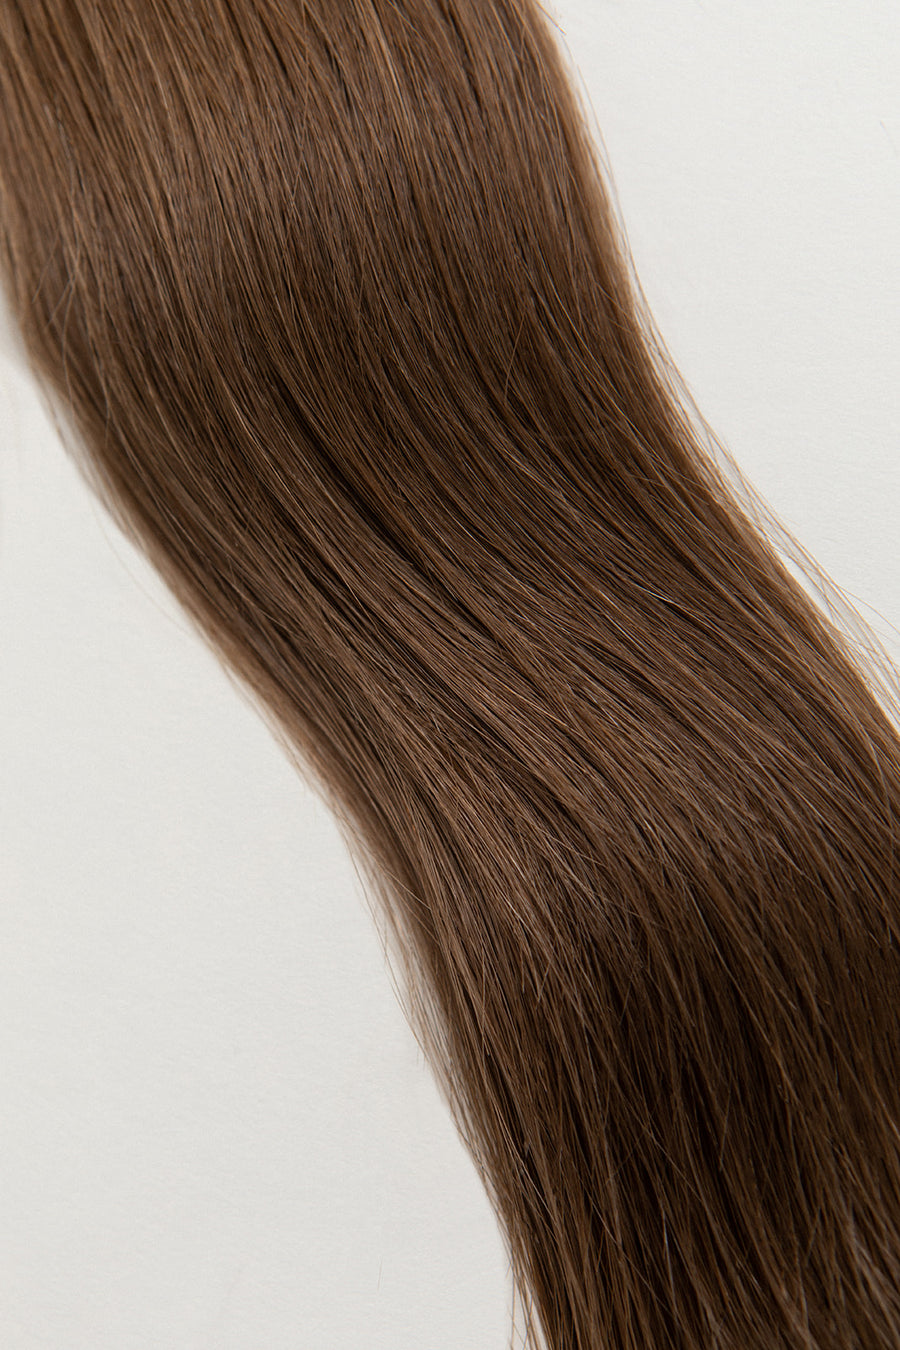 Walnut is our light brown, with cool yet rich undertones. Stylist lingo: Natural level 7 Harloc Tape-In Extensions are made from ethically sourced, premium, Remy Slavic Hair. These reusable hair extensions can be used to add length, volume, chemical-free colour, or to correct or enhance a haircut. Available in 16 beautiful shades. Combine multiple colours to create a custom colour blend and perfect match.